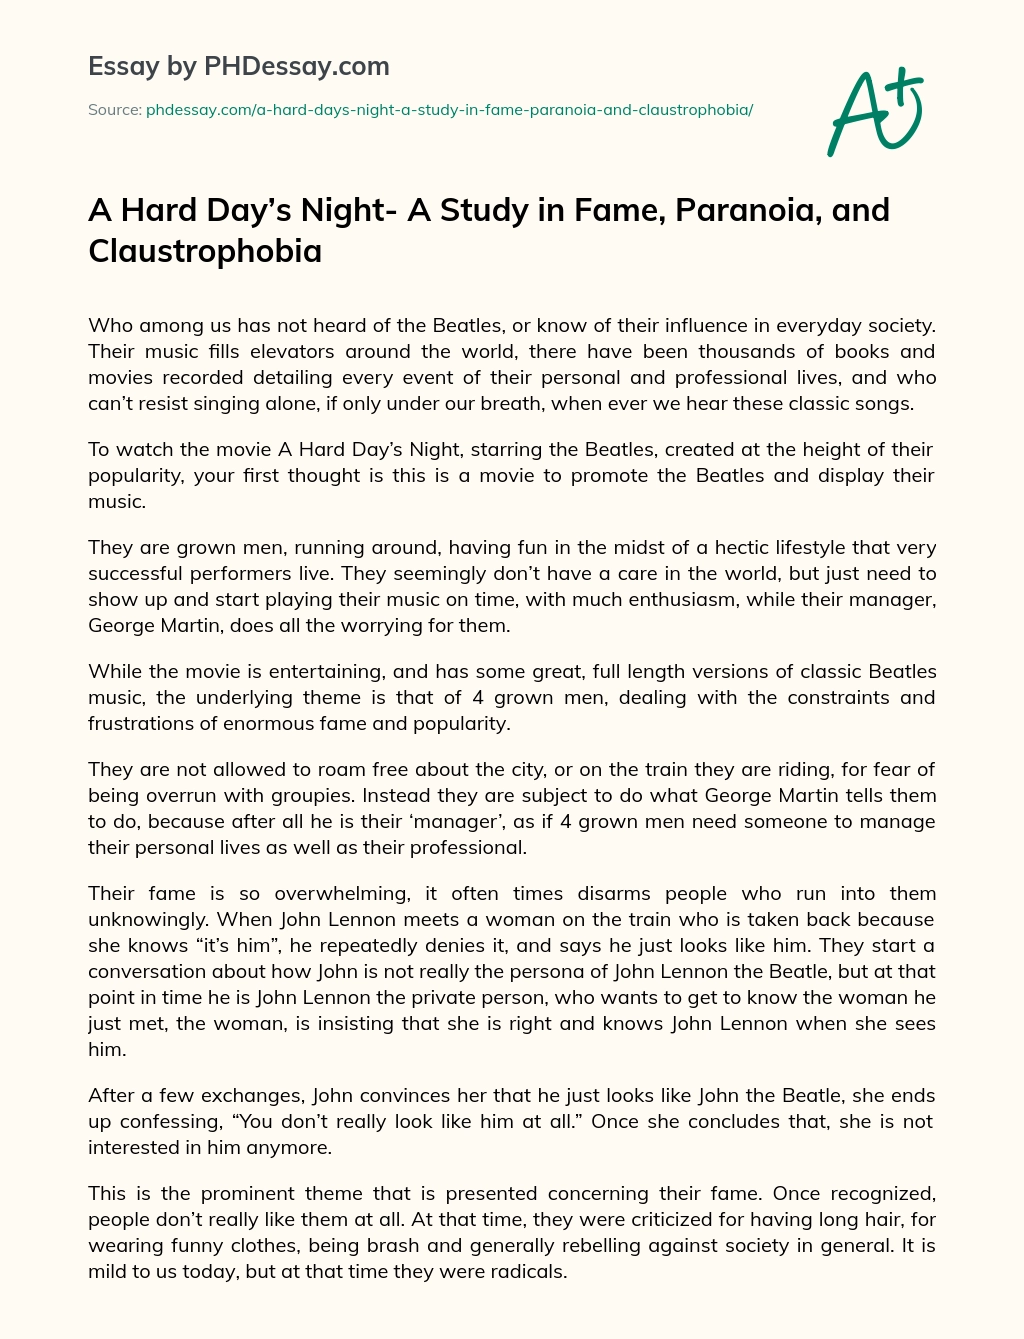 A Hard Day’s Night- A Study in Fame, Paranoia, and Claustrophobia essay